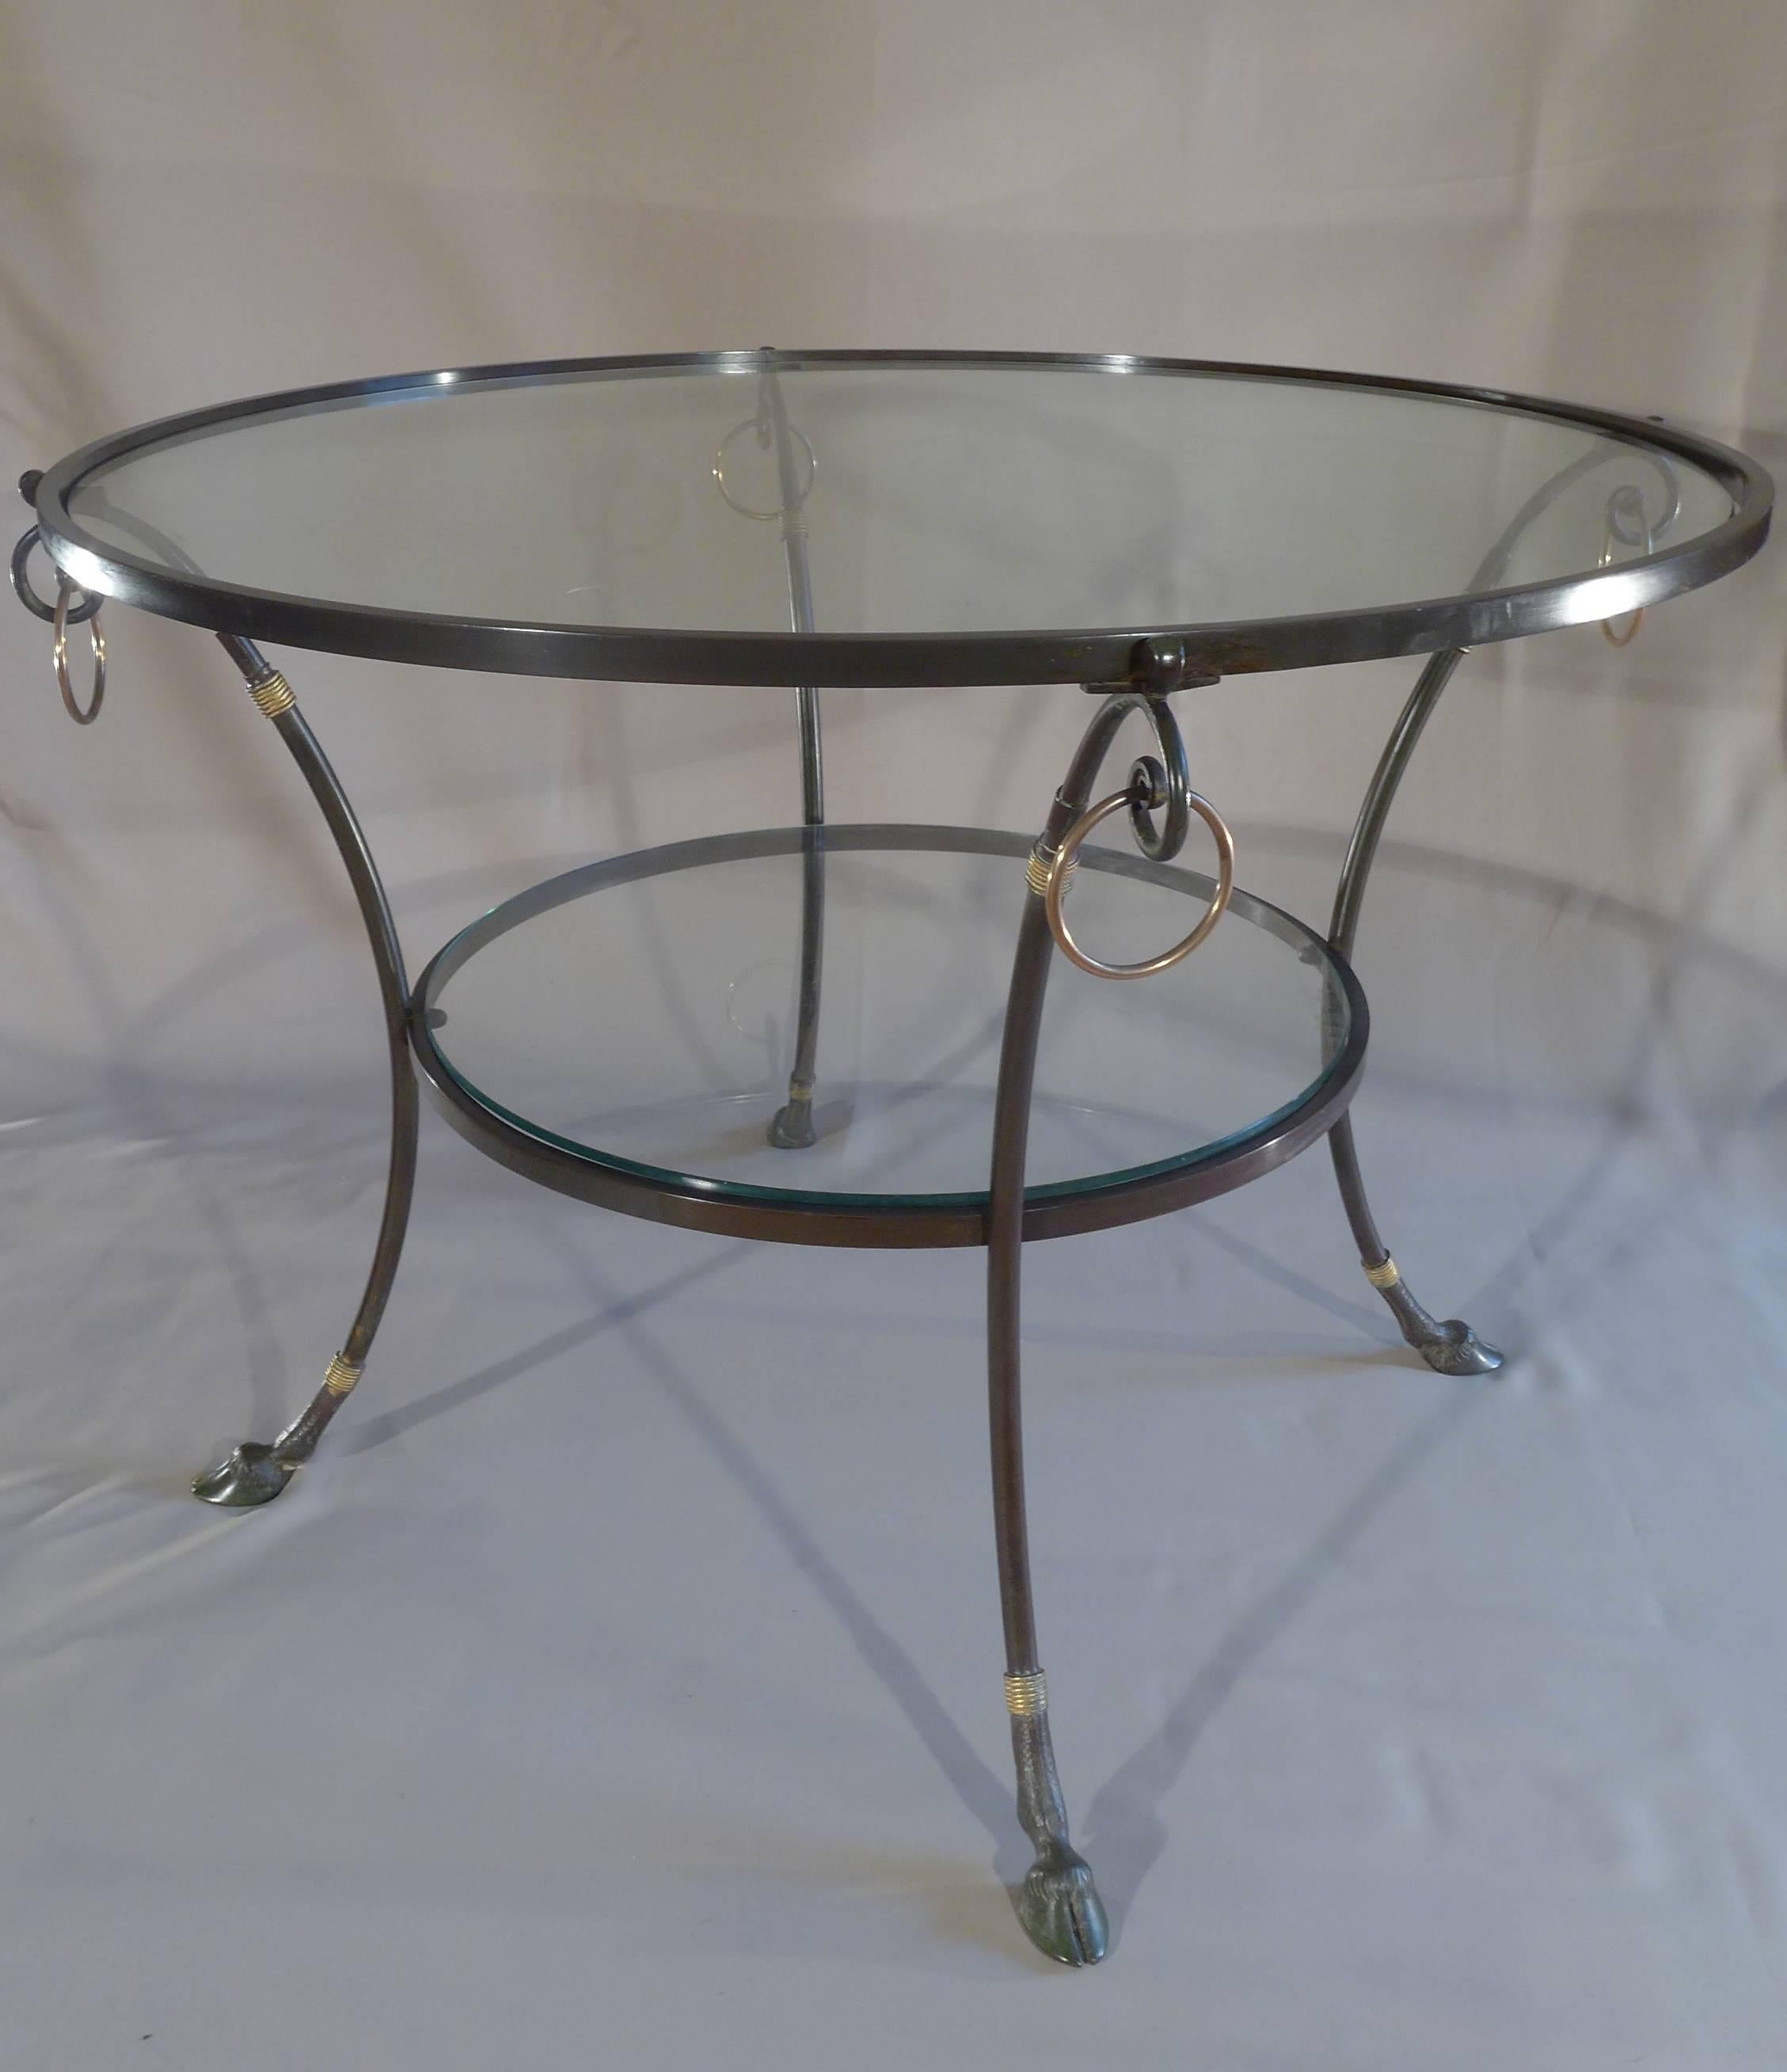 French design, late 20h century iron patinated, hoop ring details, curved legs terminated by animal hoofs, glass top,
circa 1960-1970.
Dimensions: 21.25 in. H, 30.70 in. W.